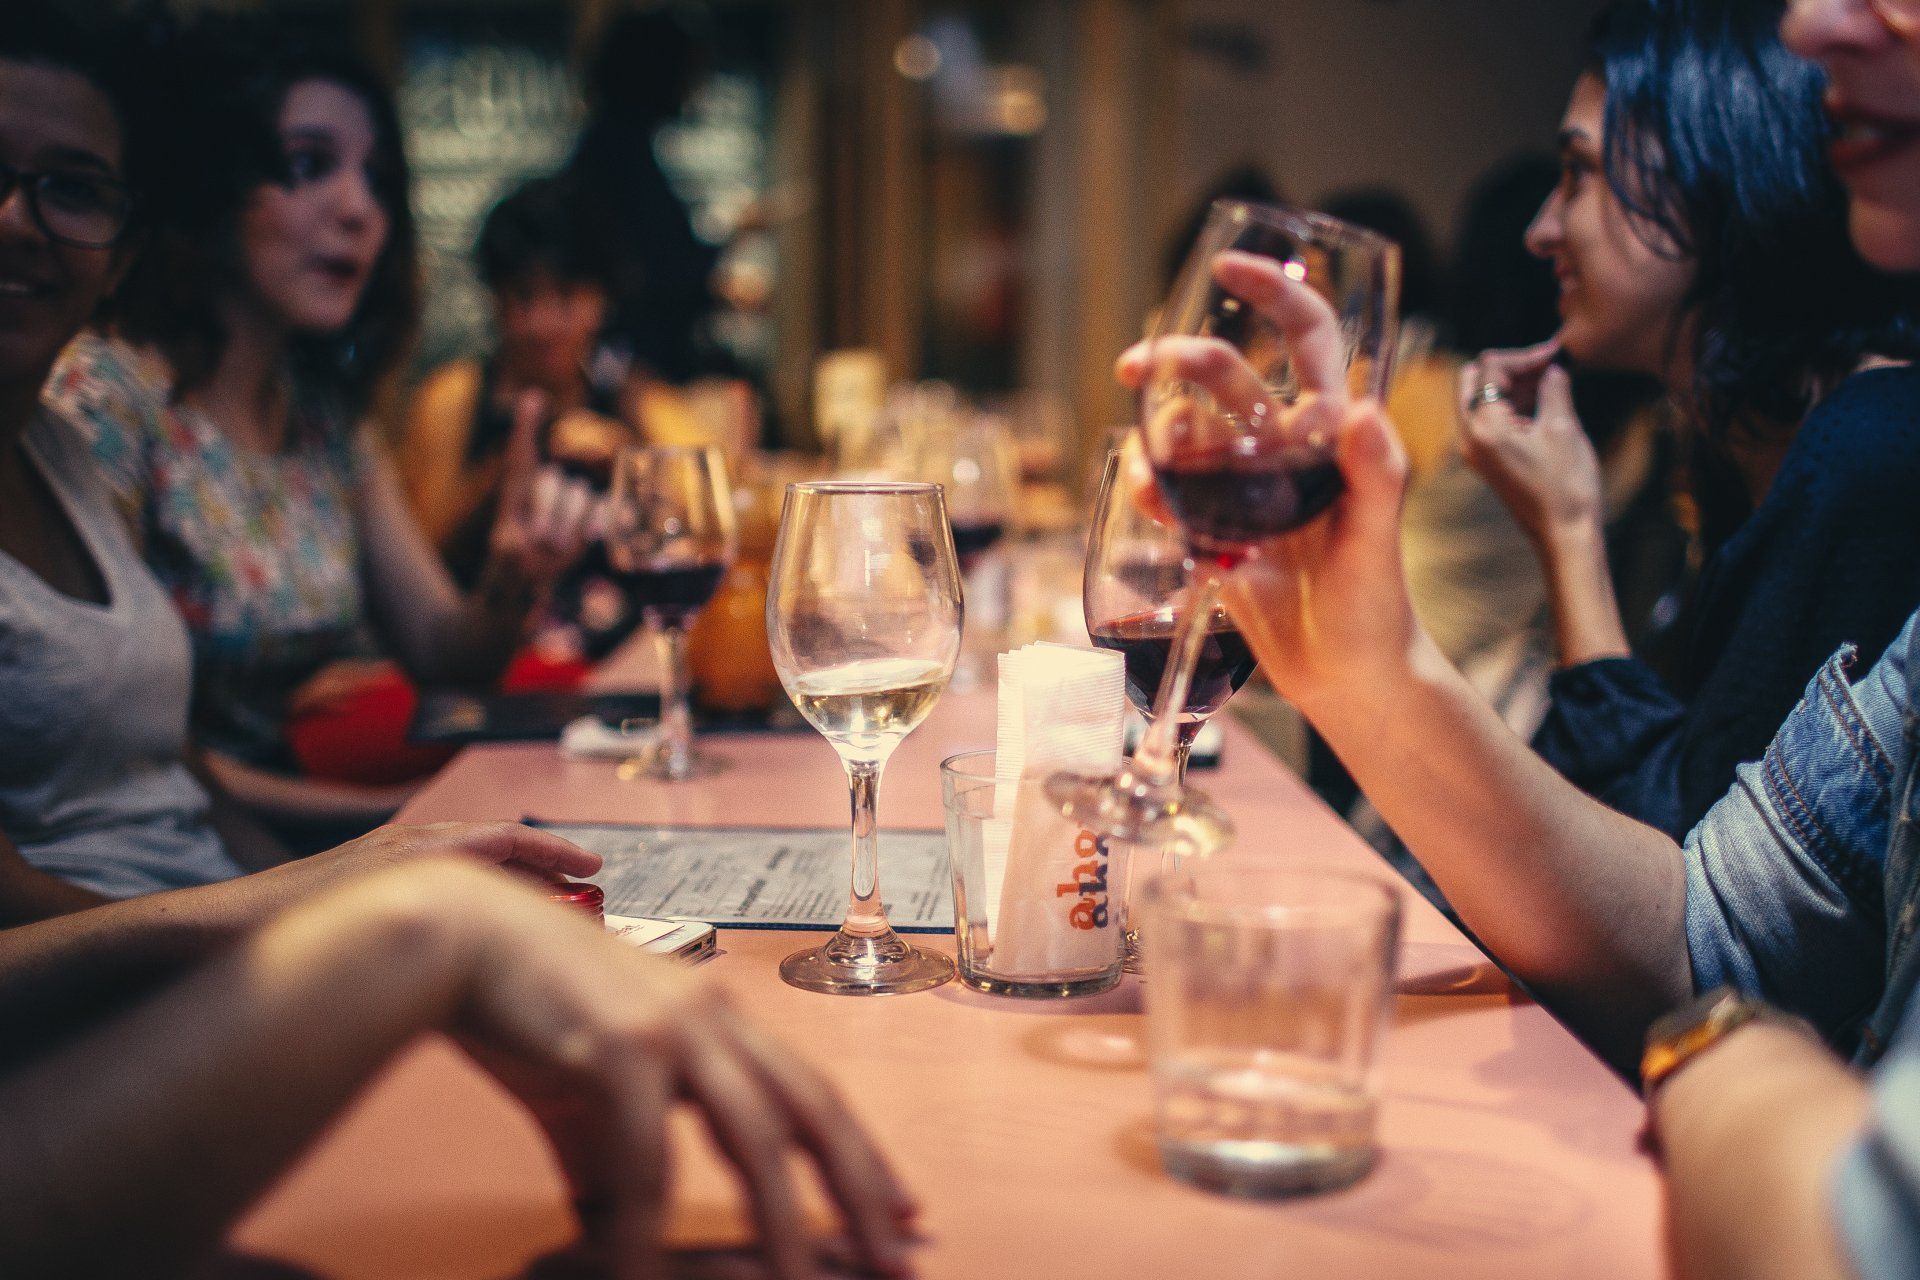 A group of people are sitting at a table drinking wine.